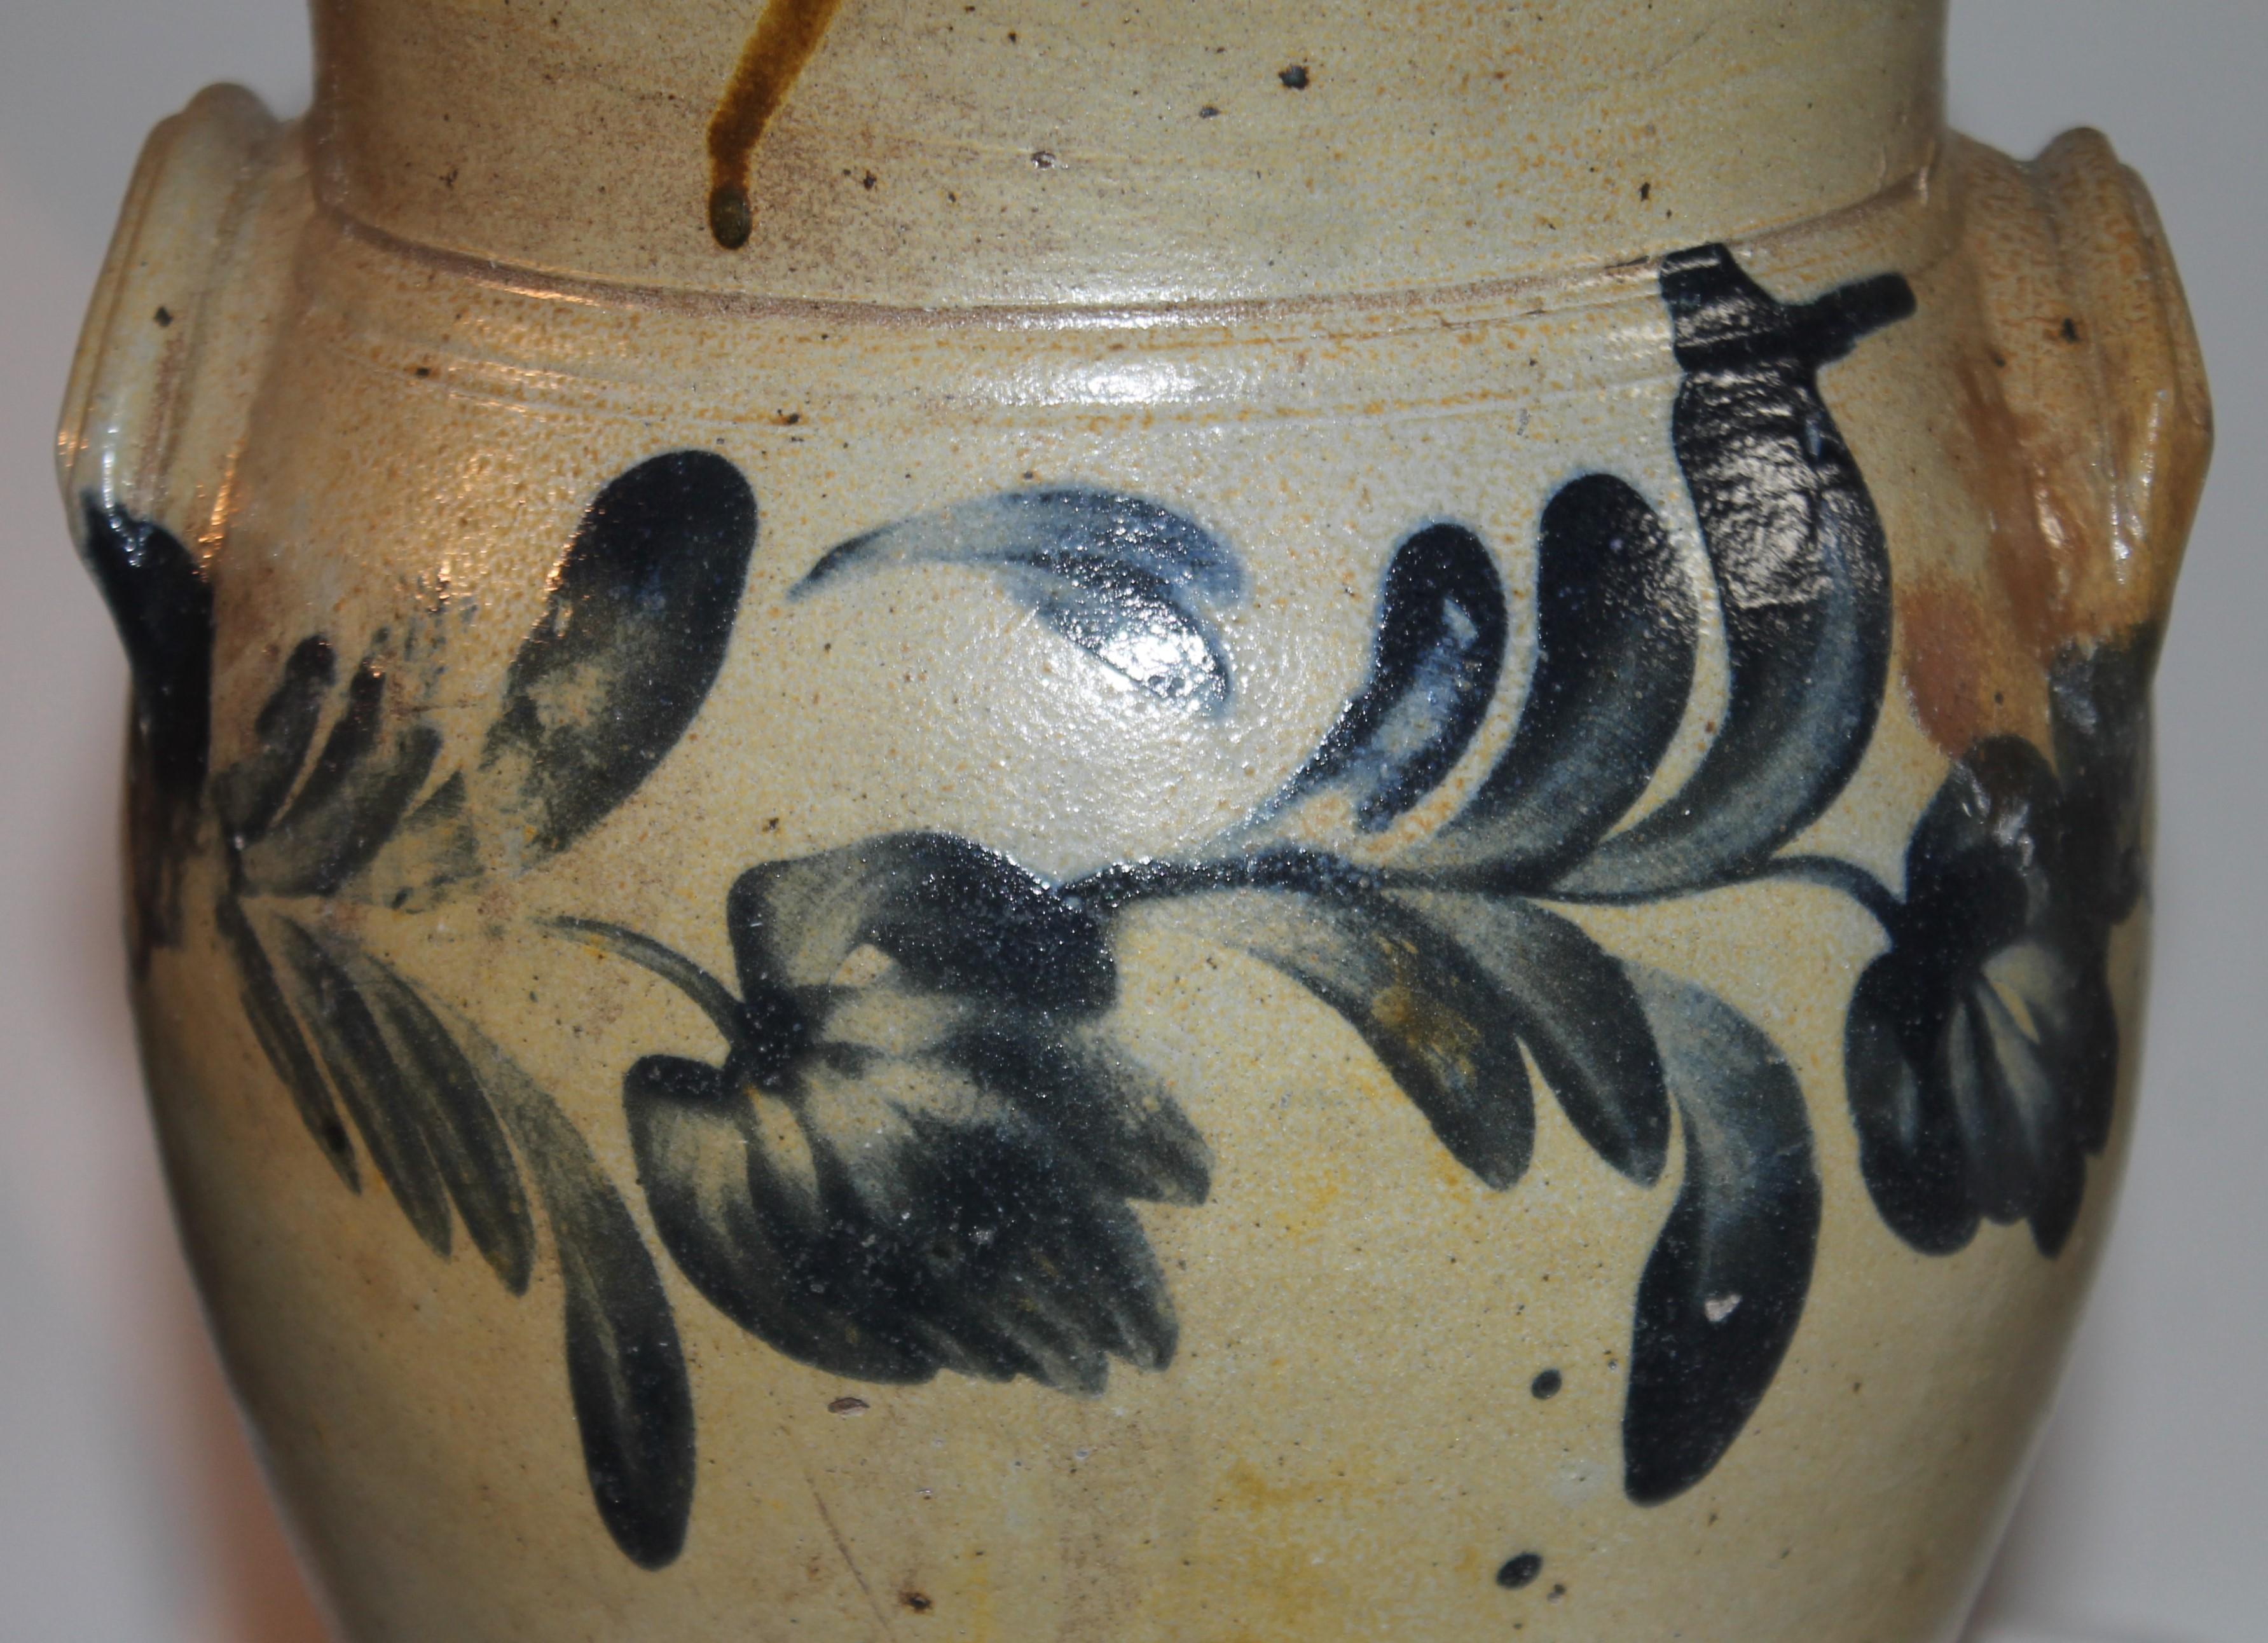 American 19thc Decorated Crock with Handles from Pennsylvania